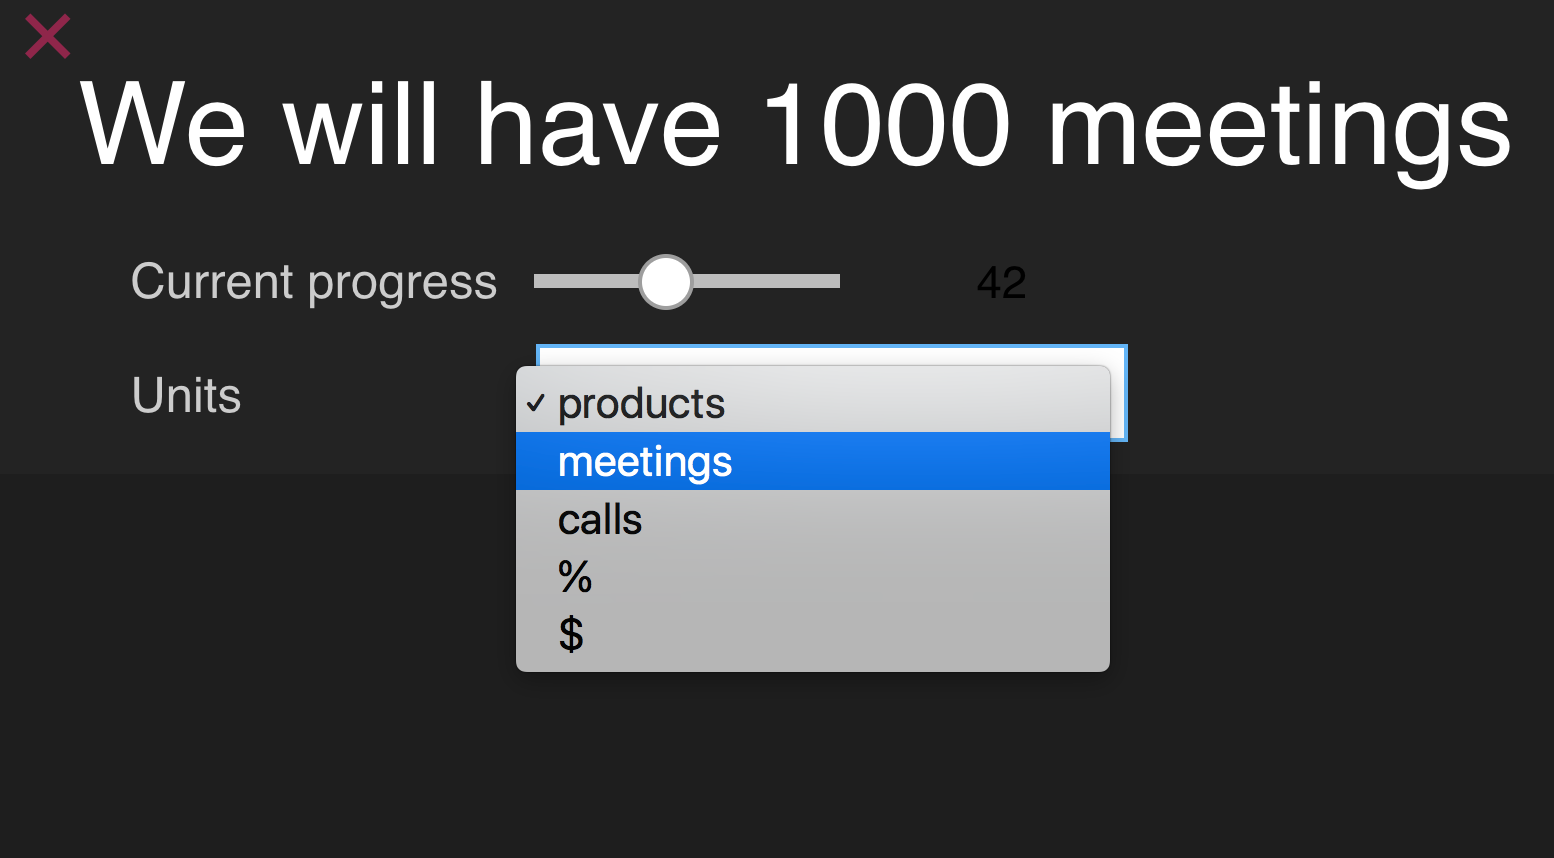 Automatically generating goal-progress interfaces from natural language ...